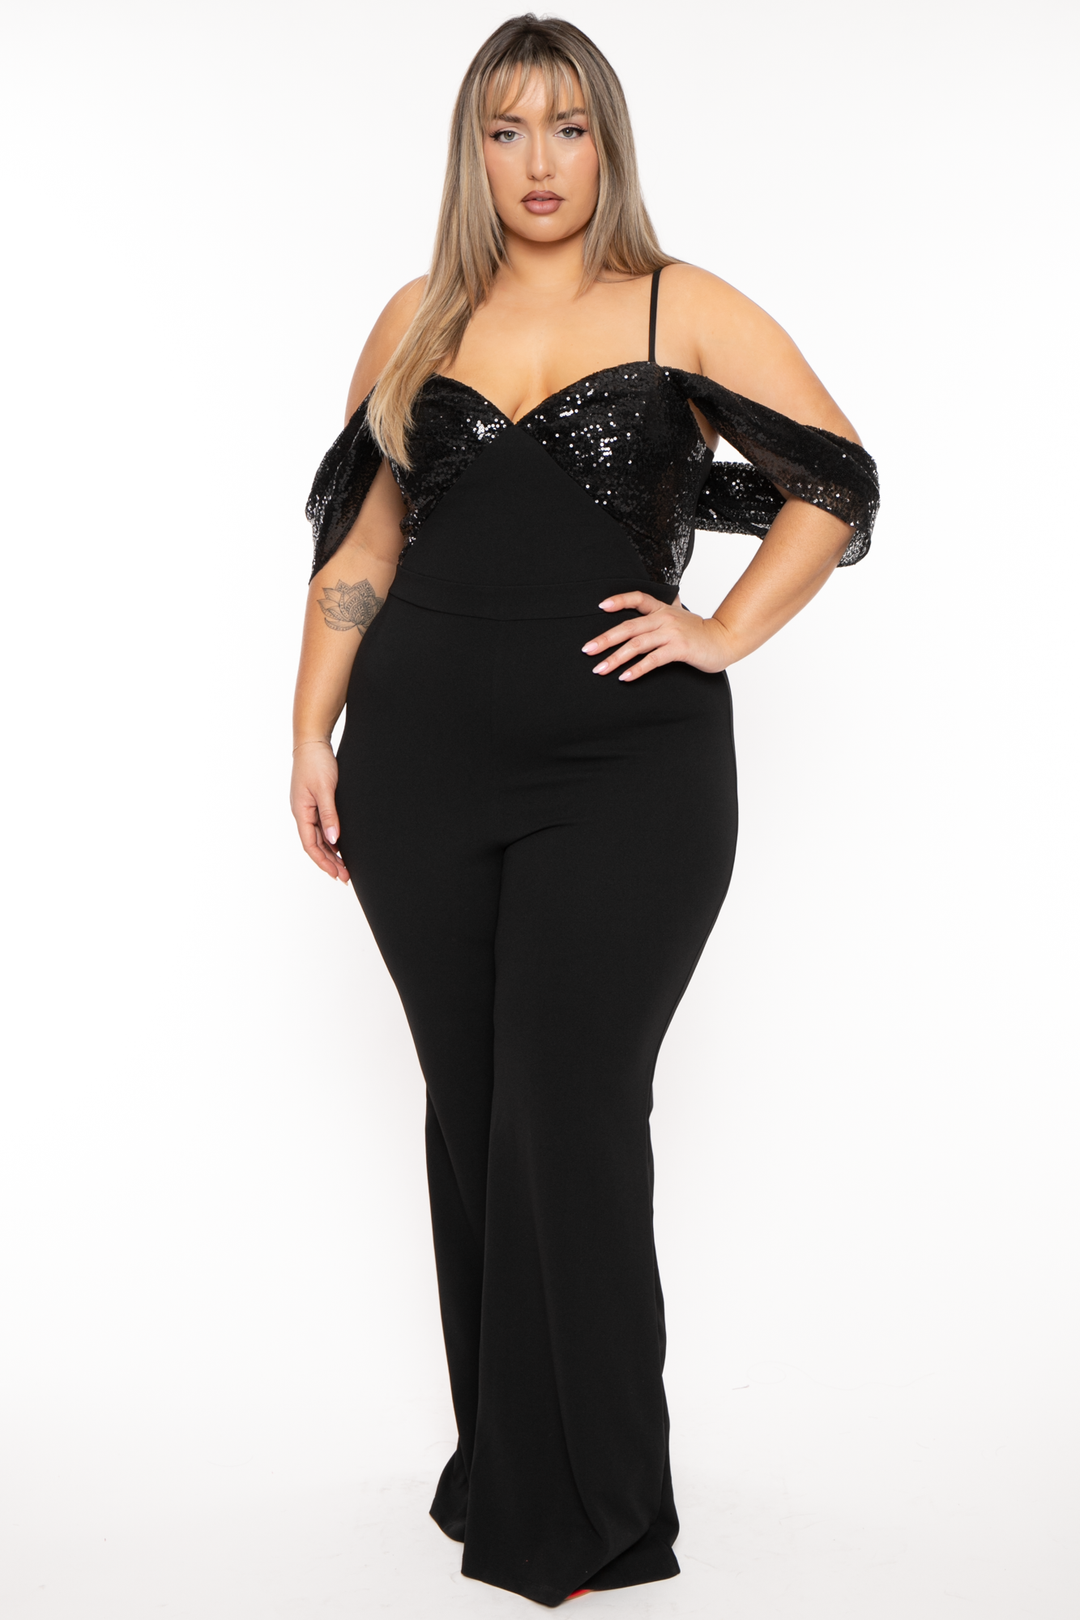 Curvy Sense - Get an extra 20% off all items on